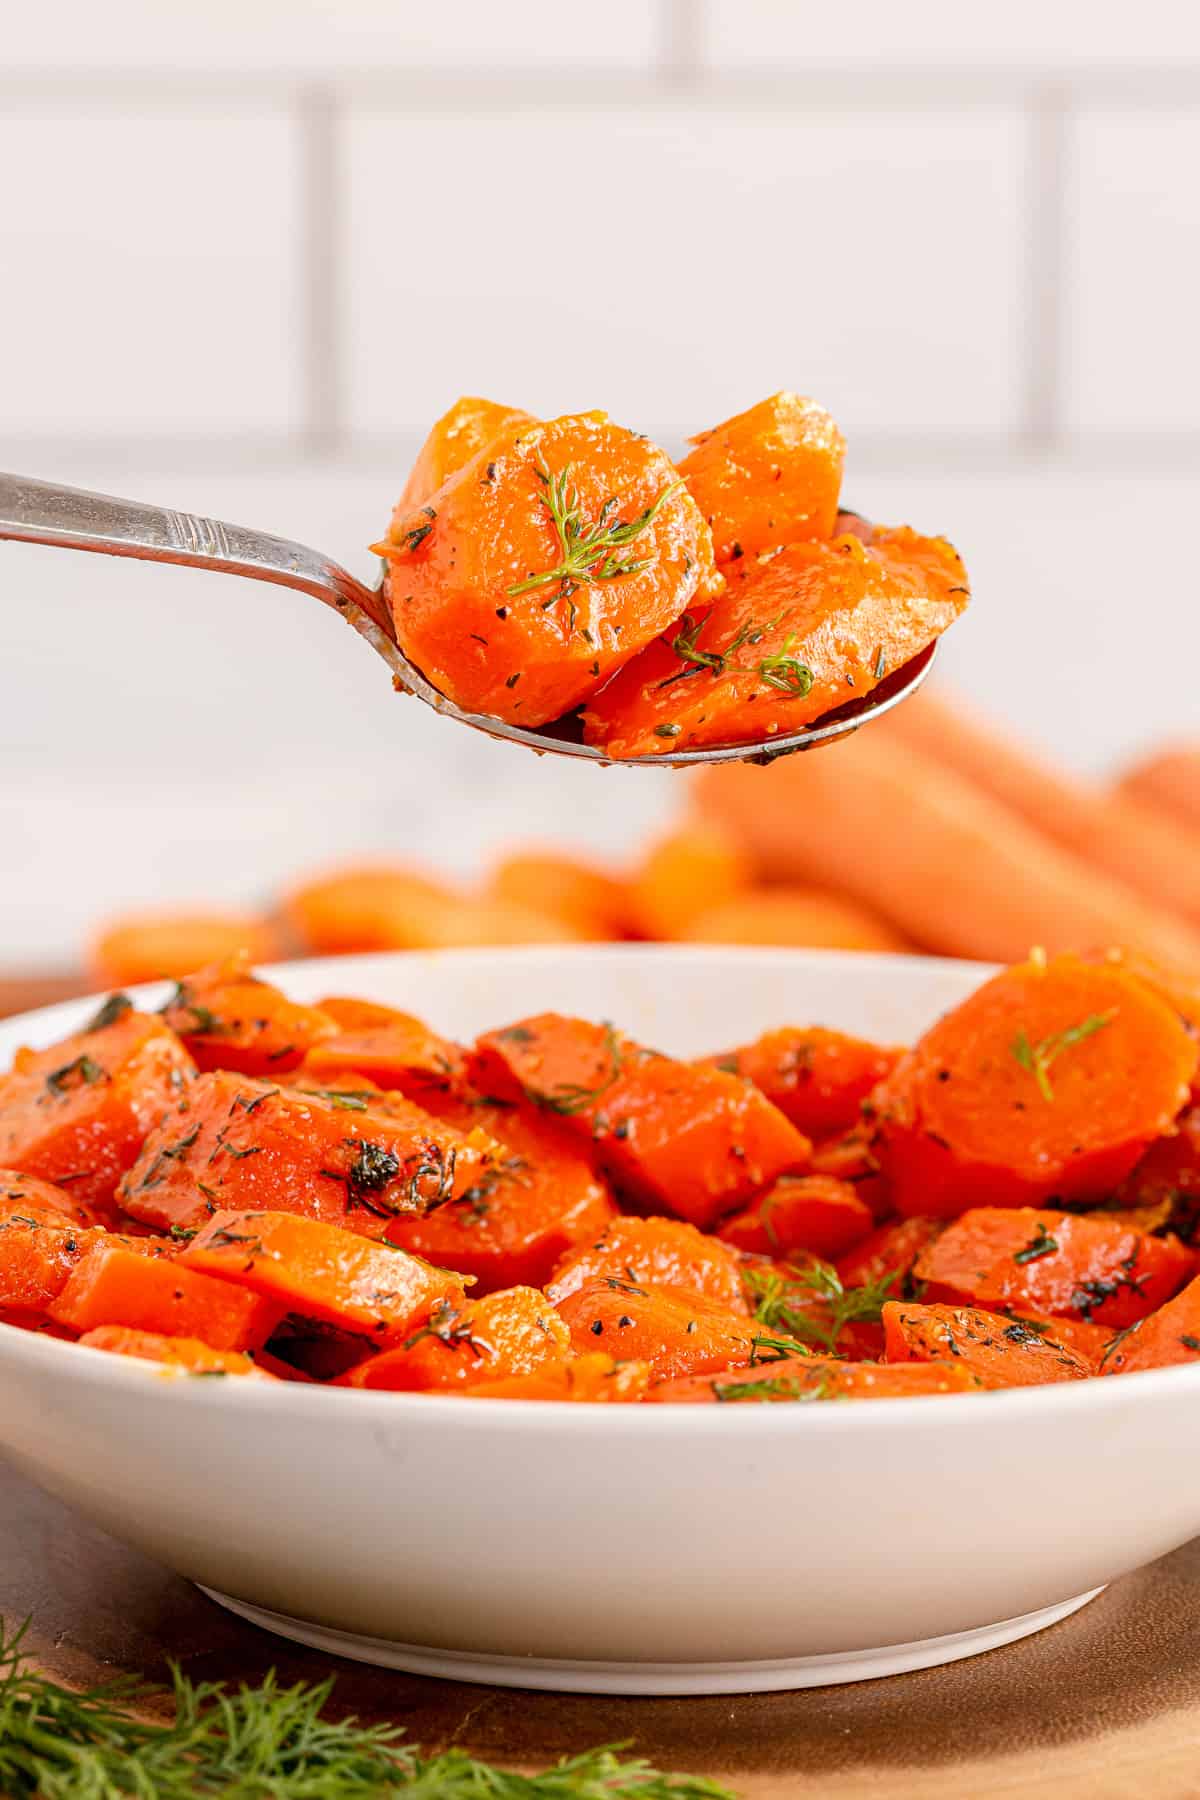 A spoon lifts a scoop of Brown Sugar Dill Carrots.